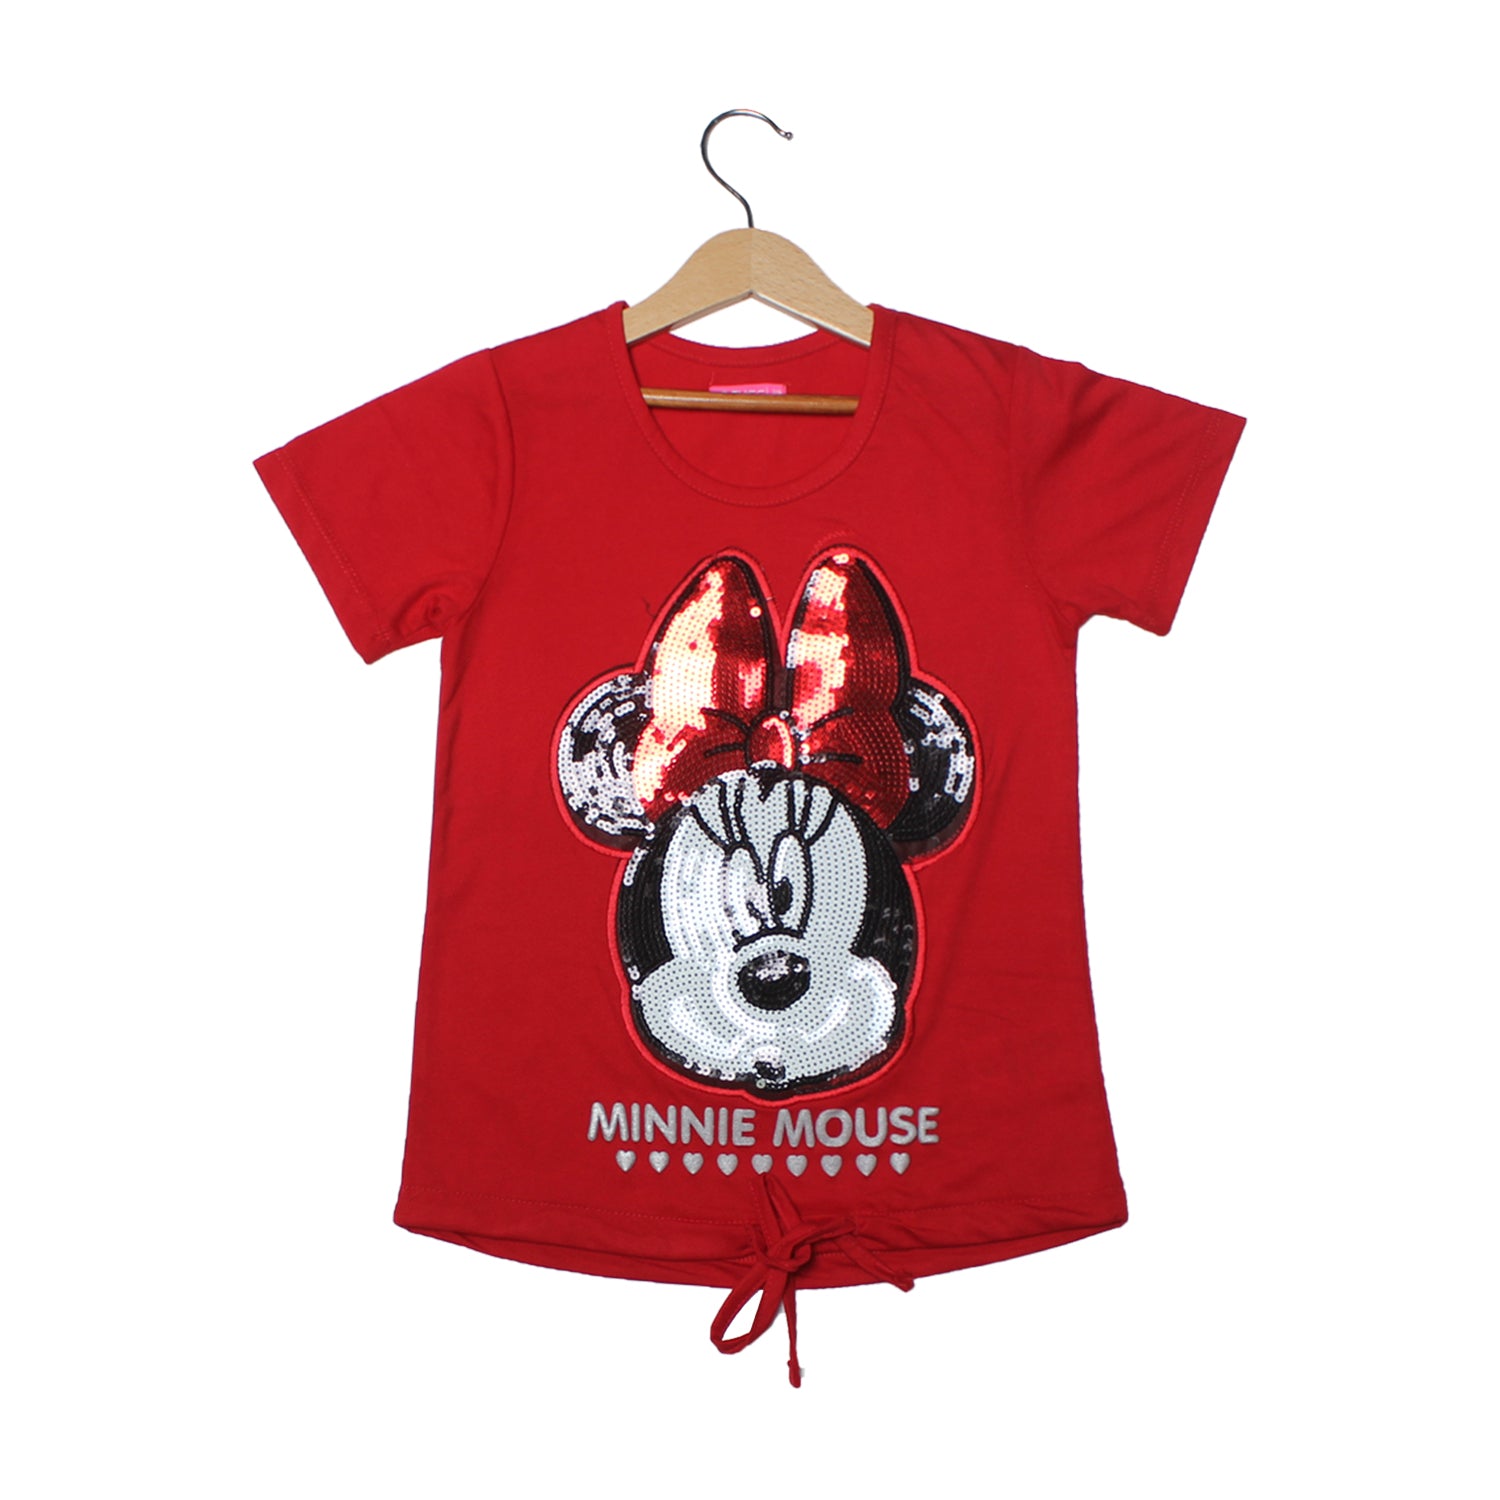 NEW RED MINNIE MOUSE PRINTED T-SHIRT TOP FOR GIRLS